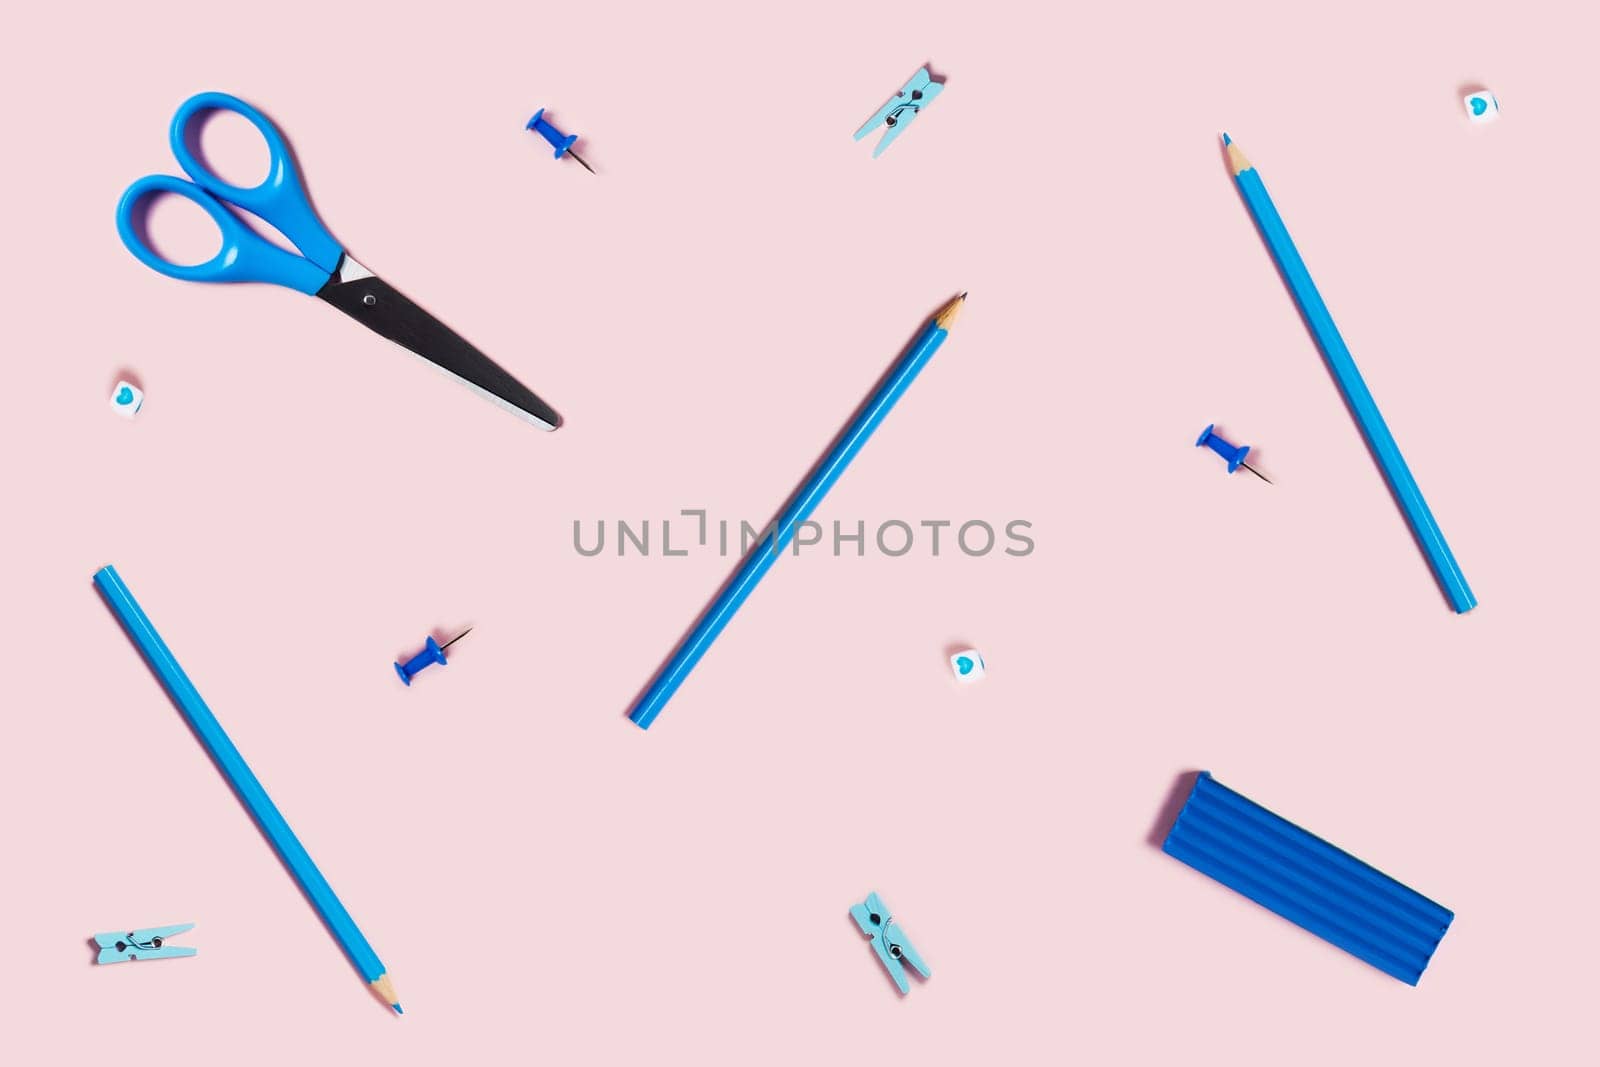 Photography on the theme of home education. Children's pink desktop with scattered blue writing accessories.